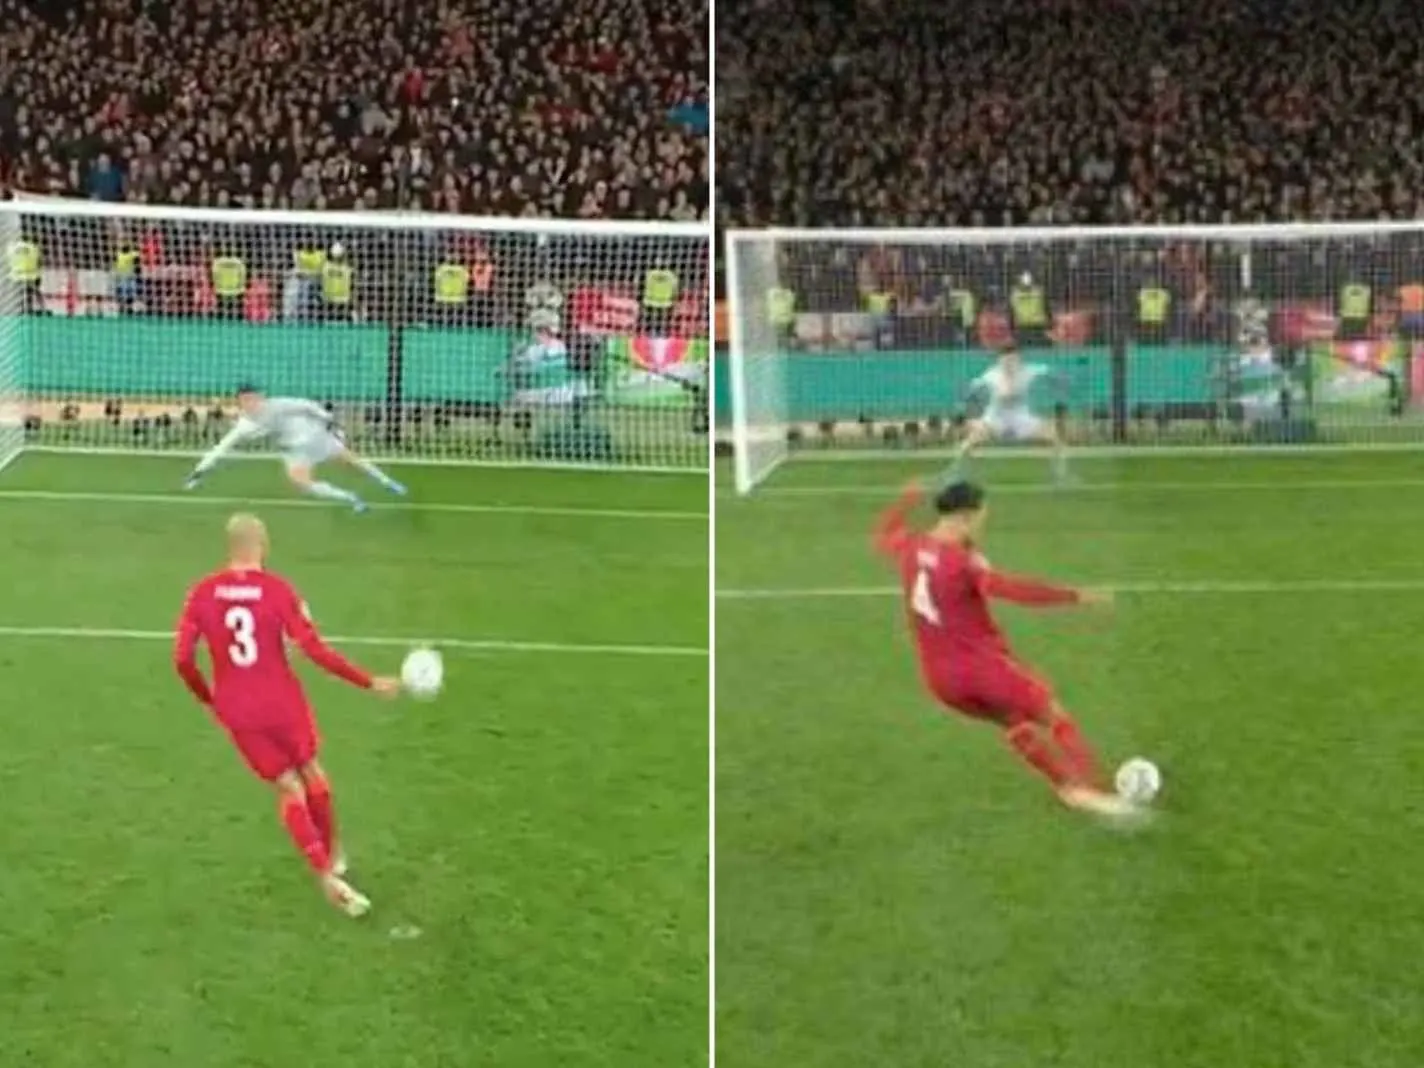 Both Fabinho and Van Dijk's penalties against Chelsea were a sight to behold